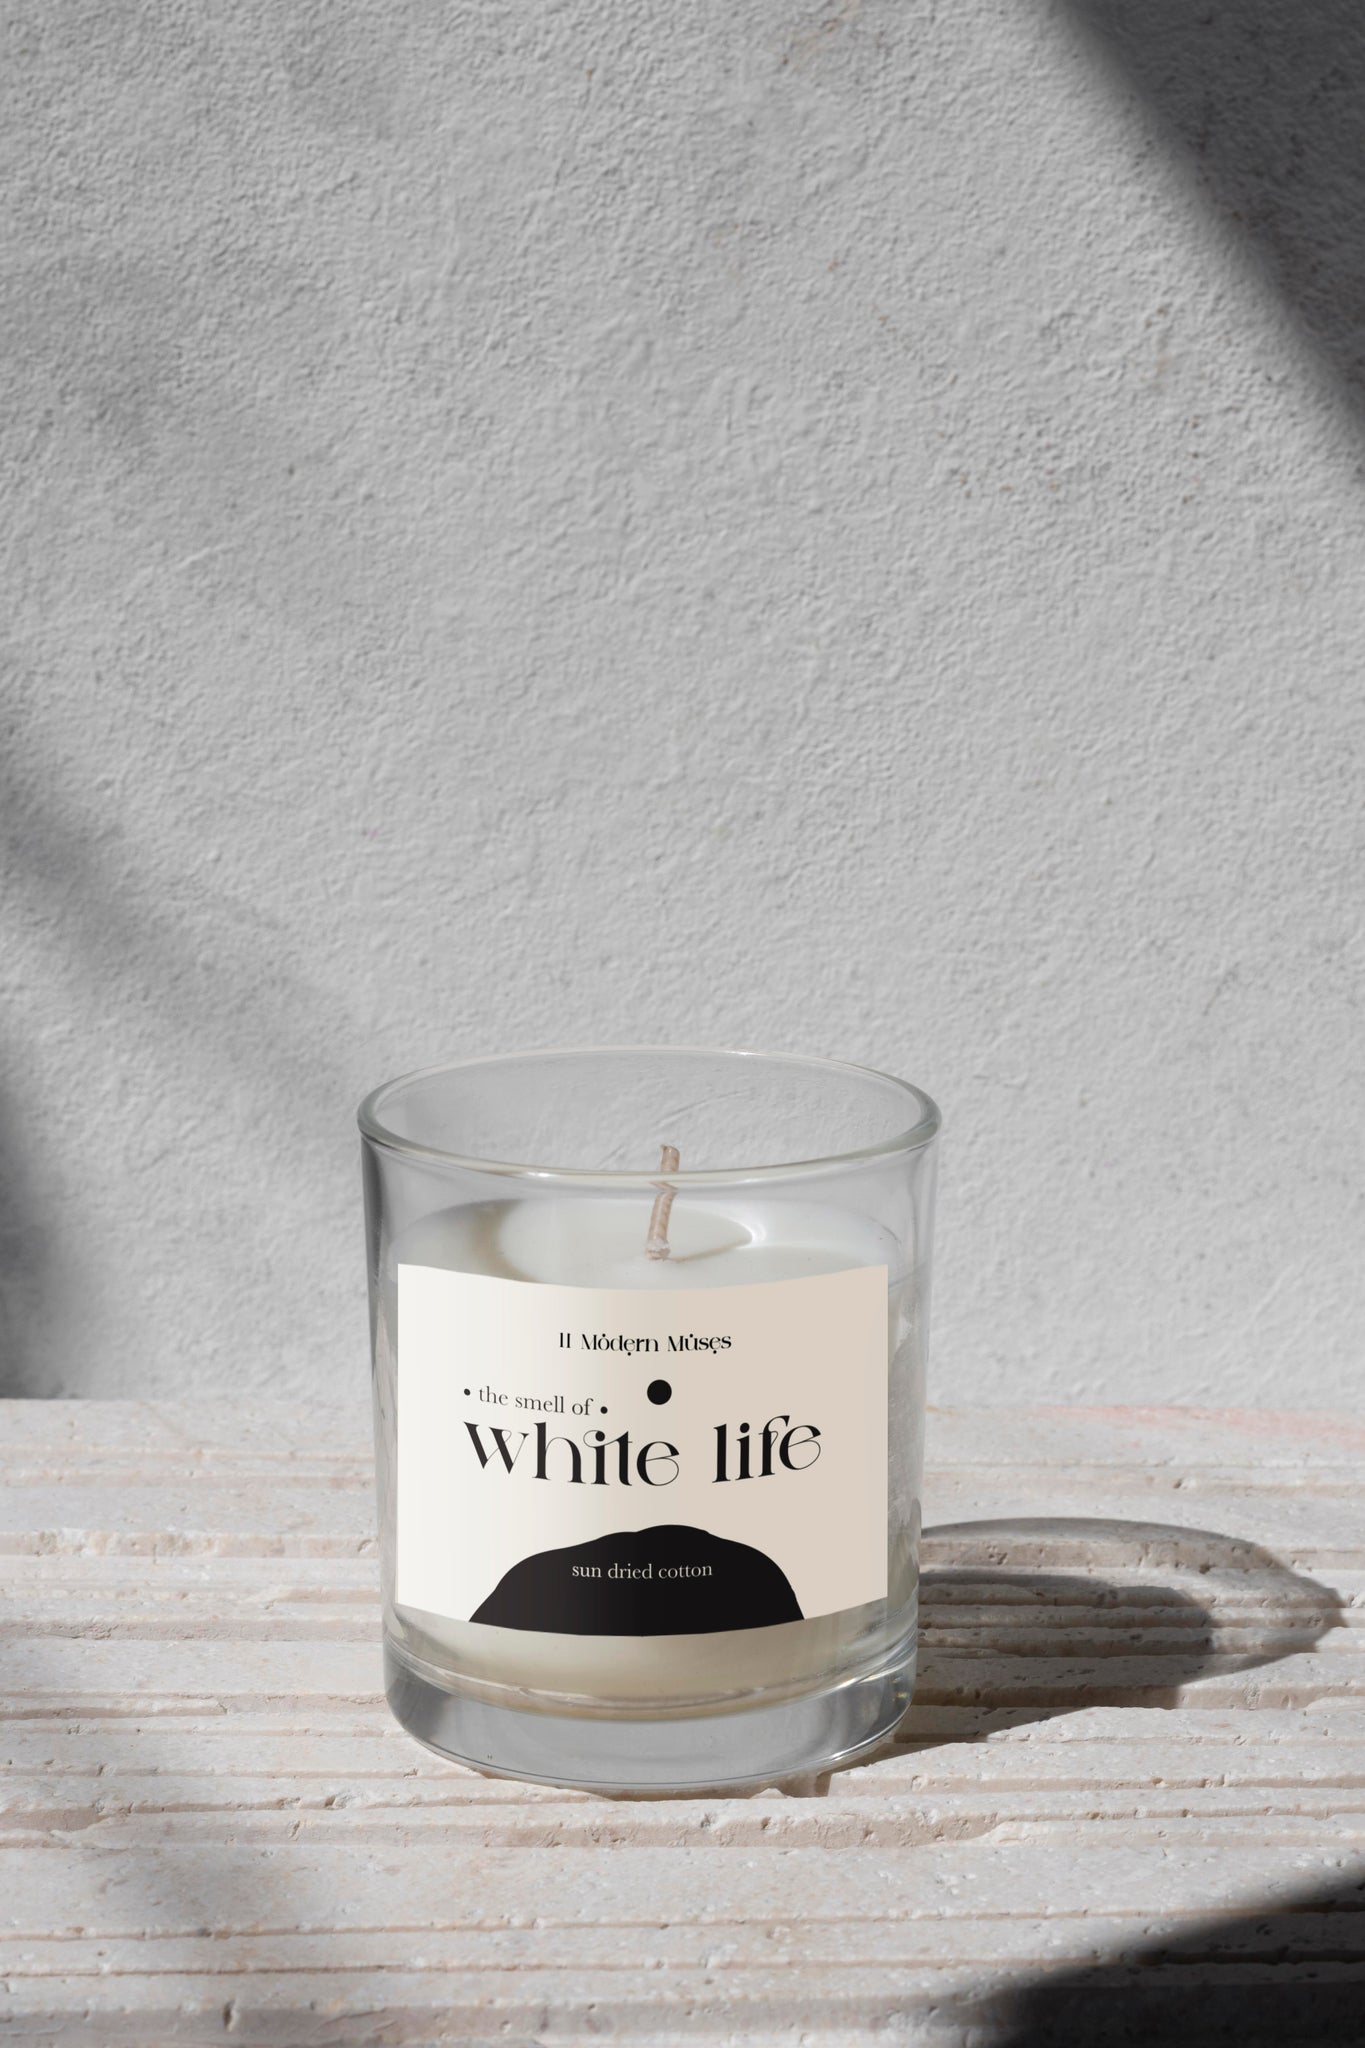 THE SMELL OF WHITE LIFE – SUN DRIED COTTON